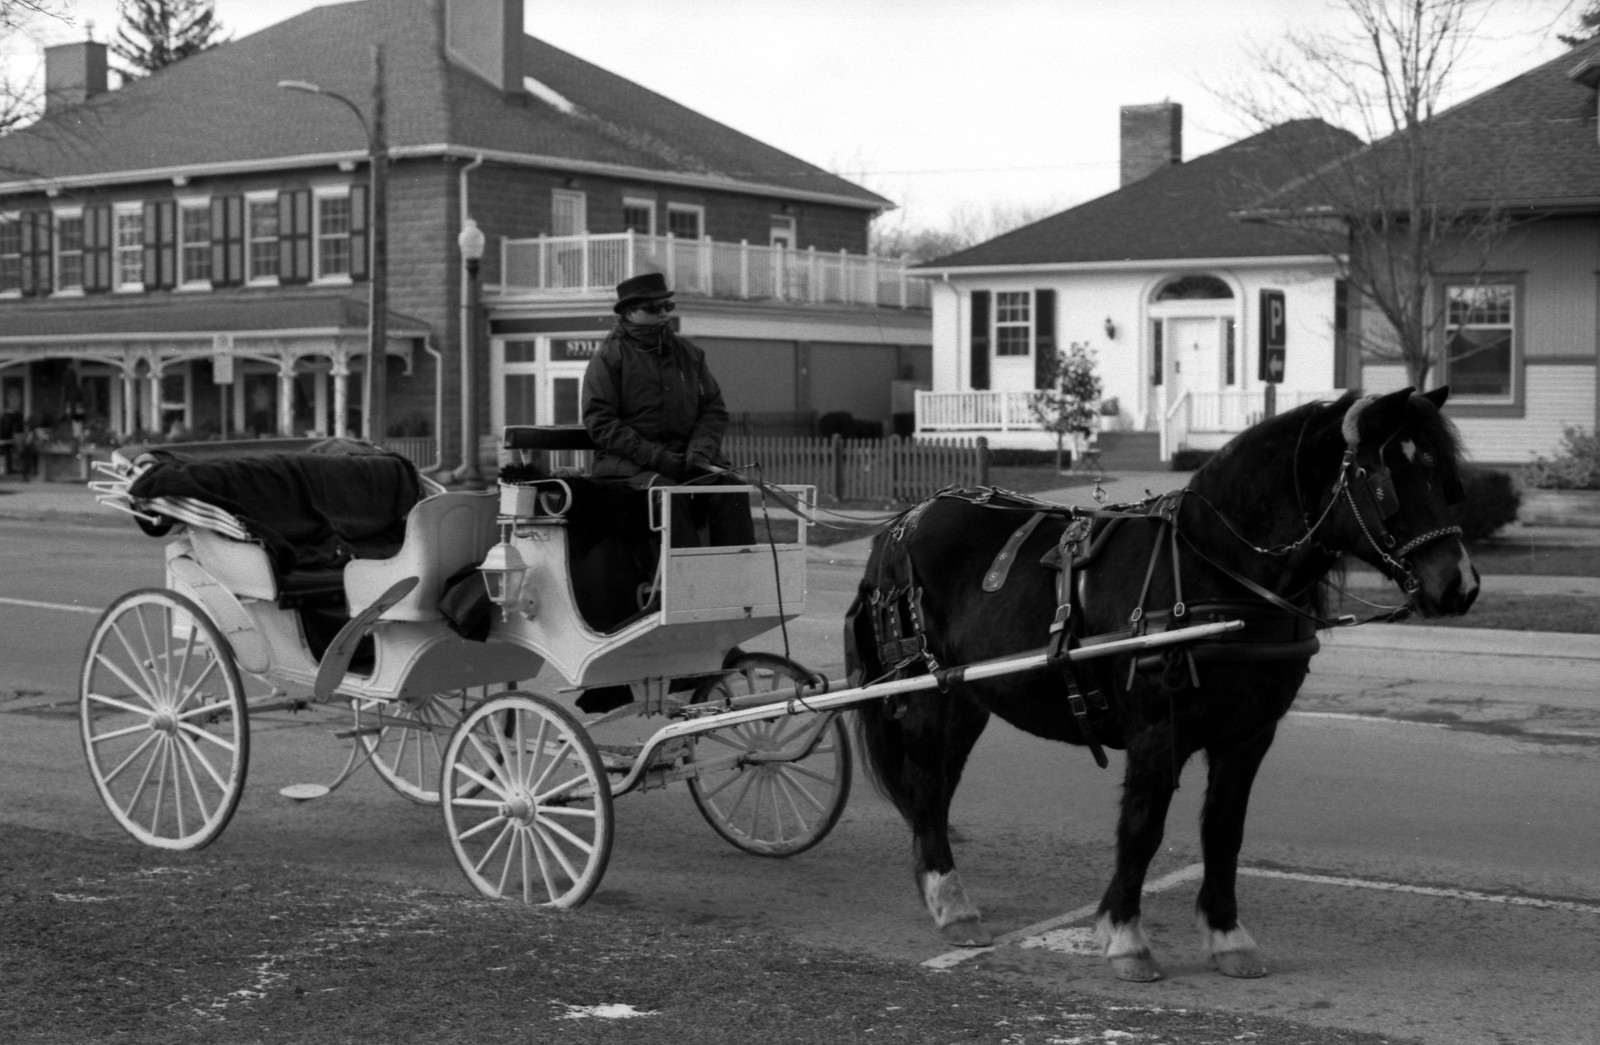 NOTL Horse and Buggy Waiting for Riders